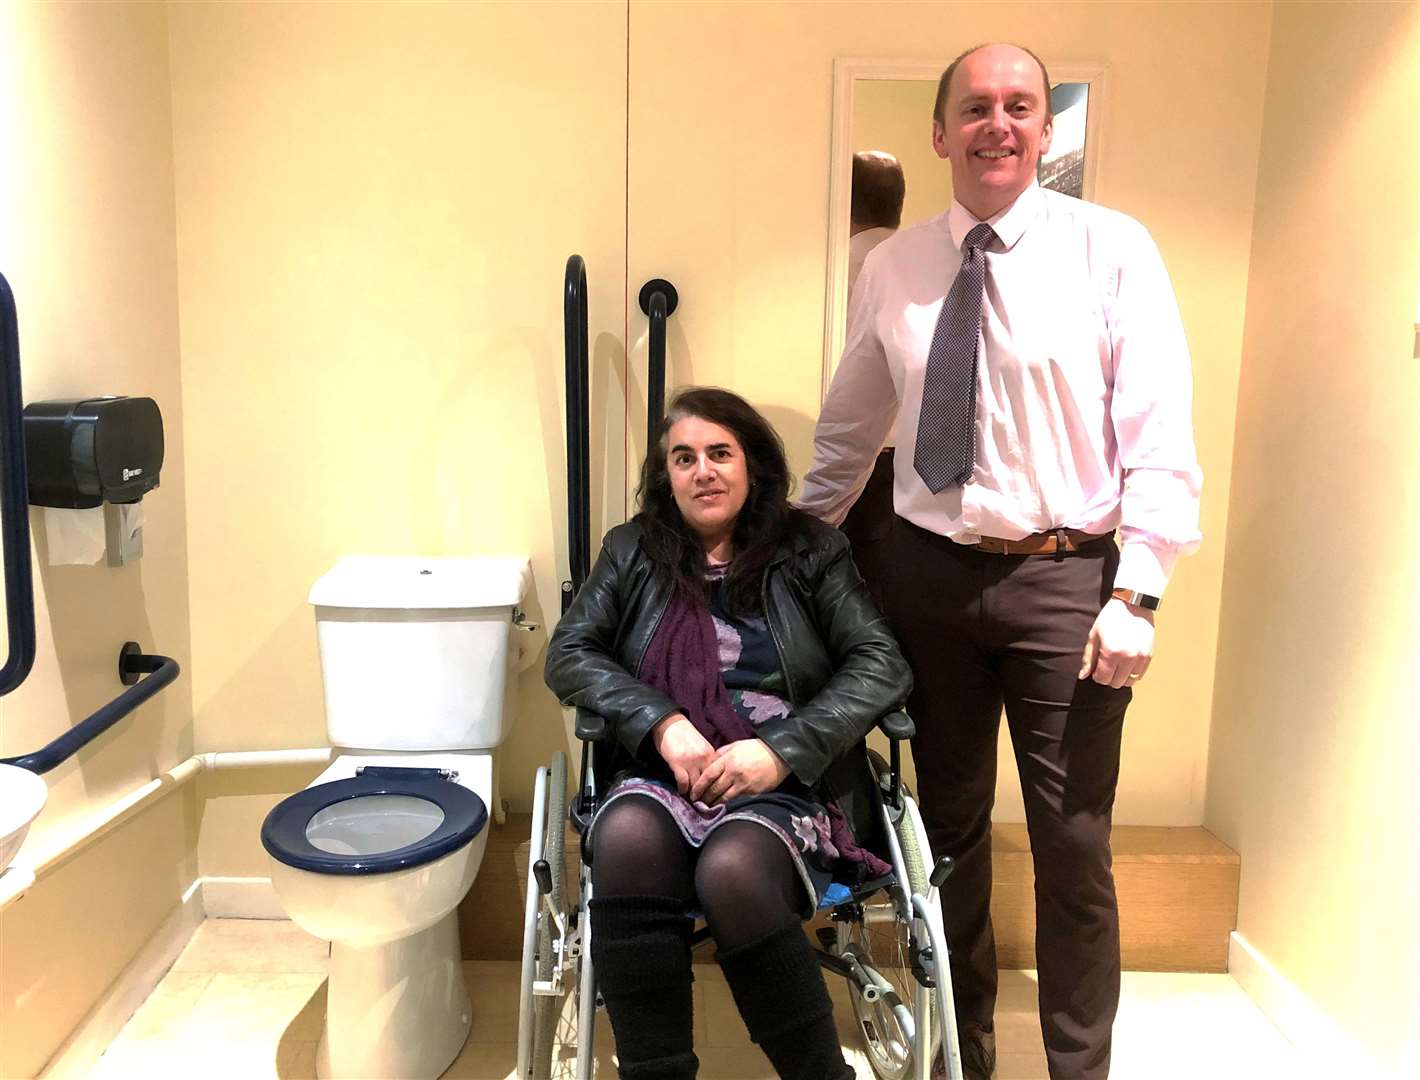 Louise Smith and Andrew Mackay in the Norseman Hotel's disabled toilet.